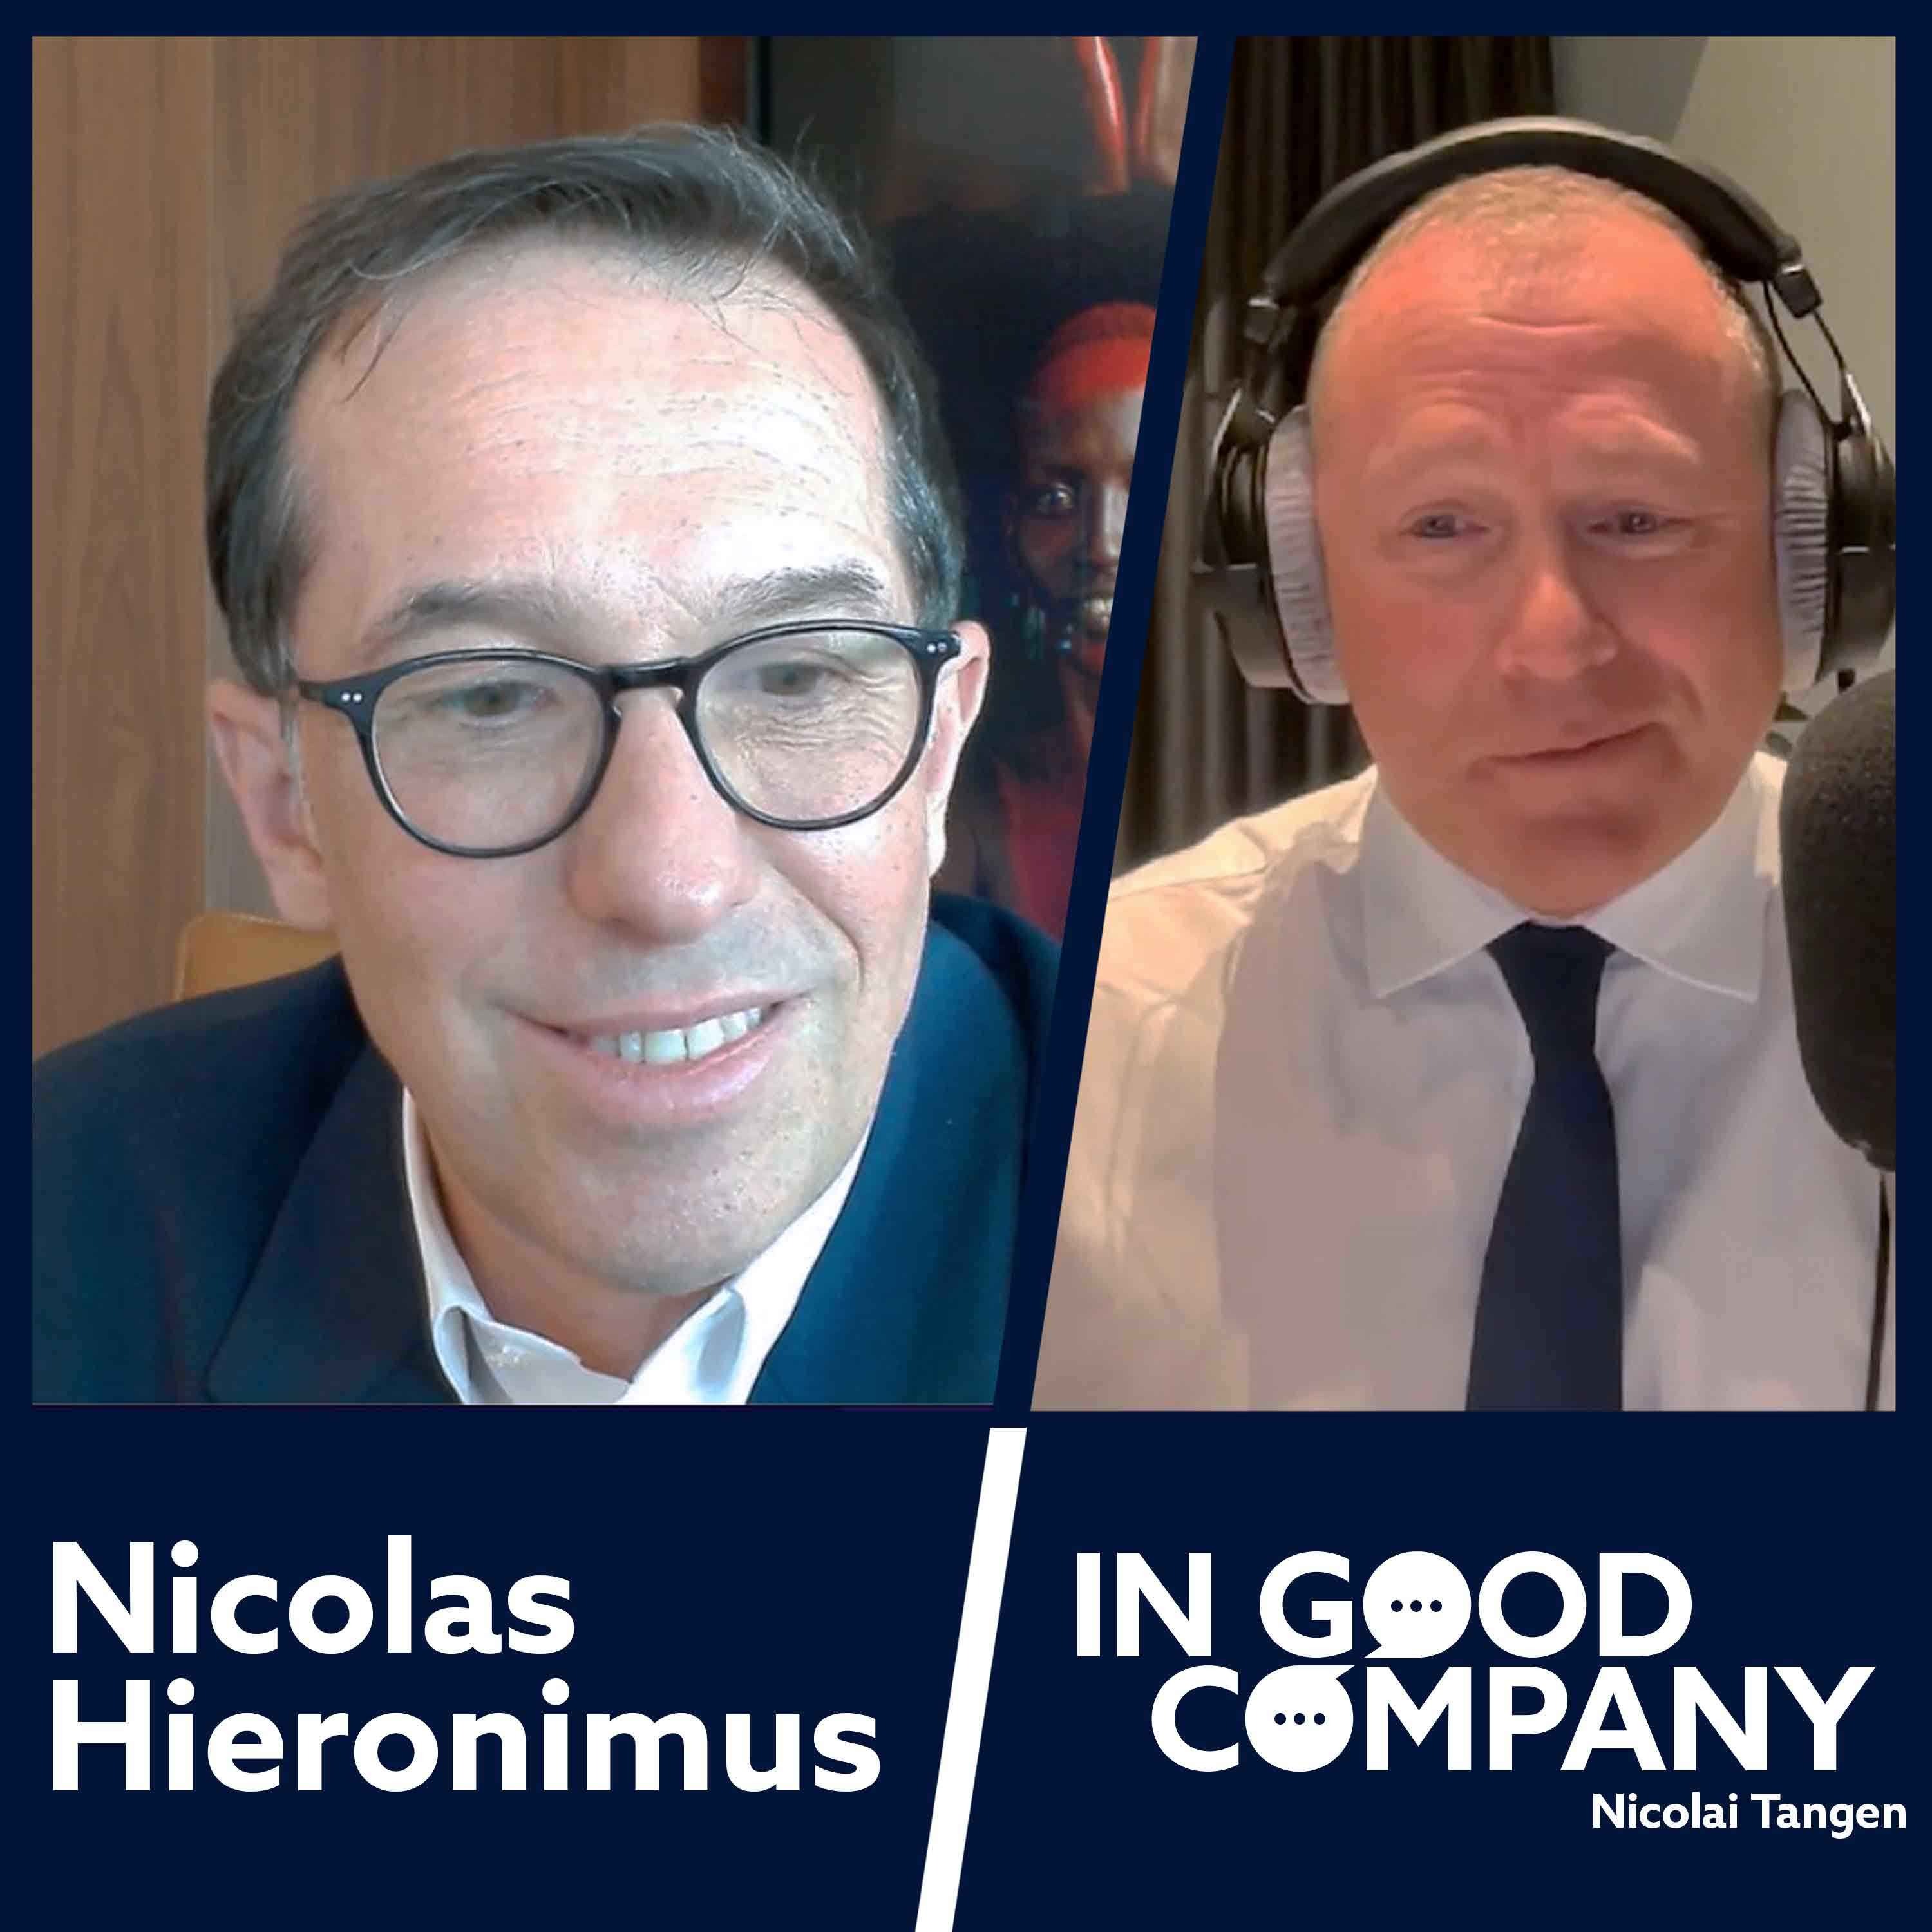 Nicolas Hieronimus CEO of L'Oréal by Norges Bank Investment Management